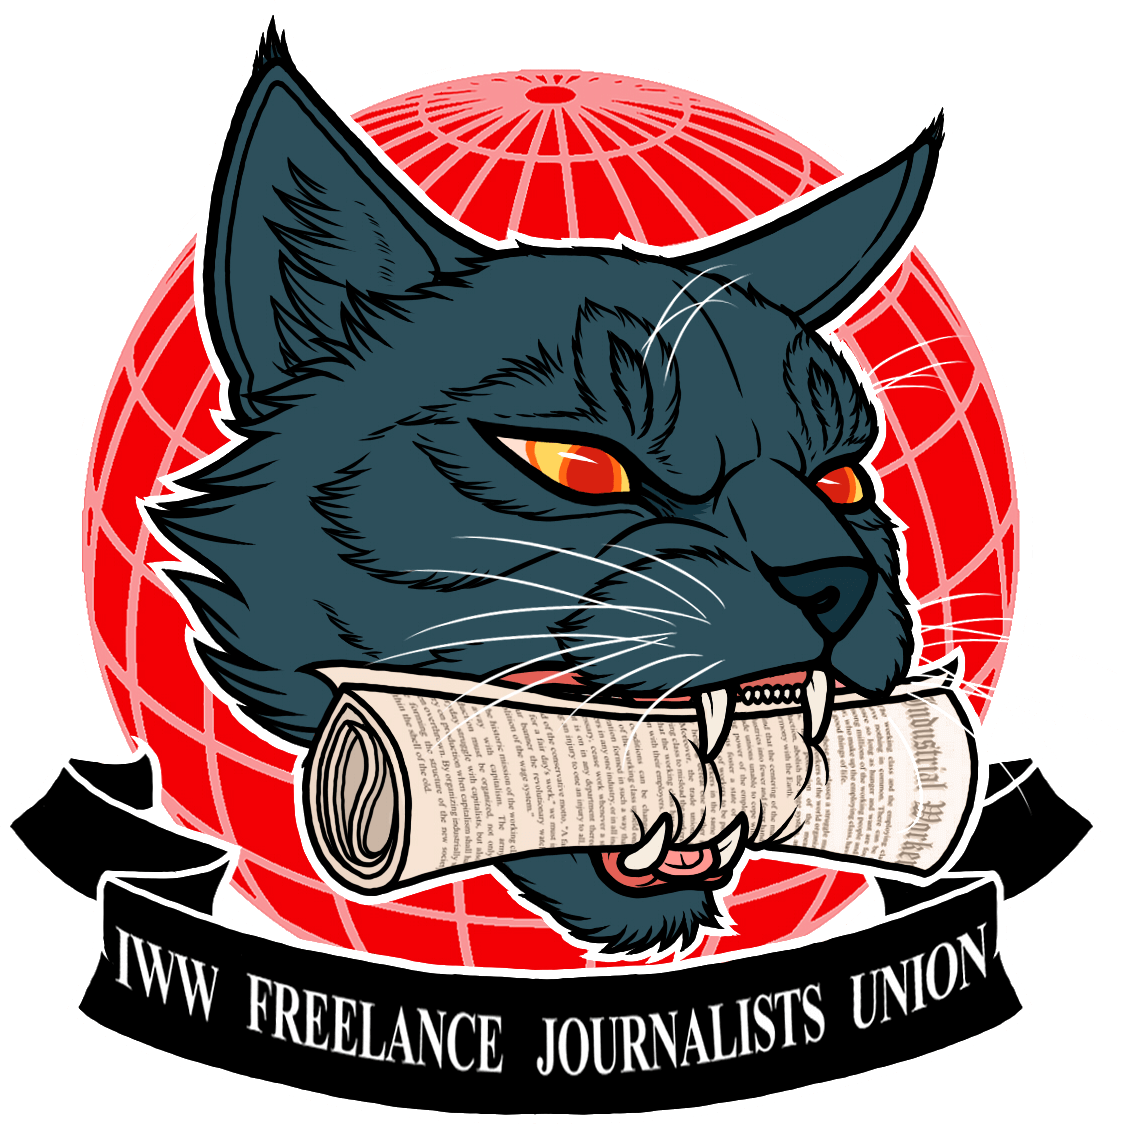 Freelance Journalists Union logo with letters FJU, image of a globe and three stars